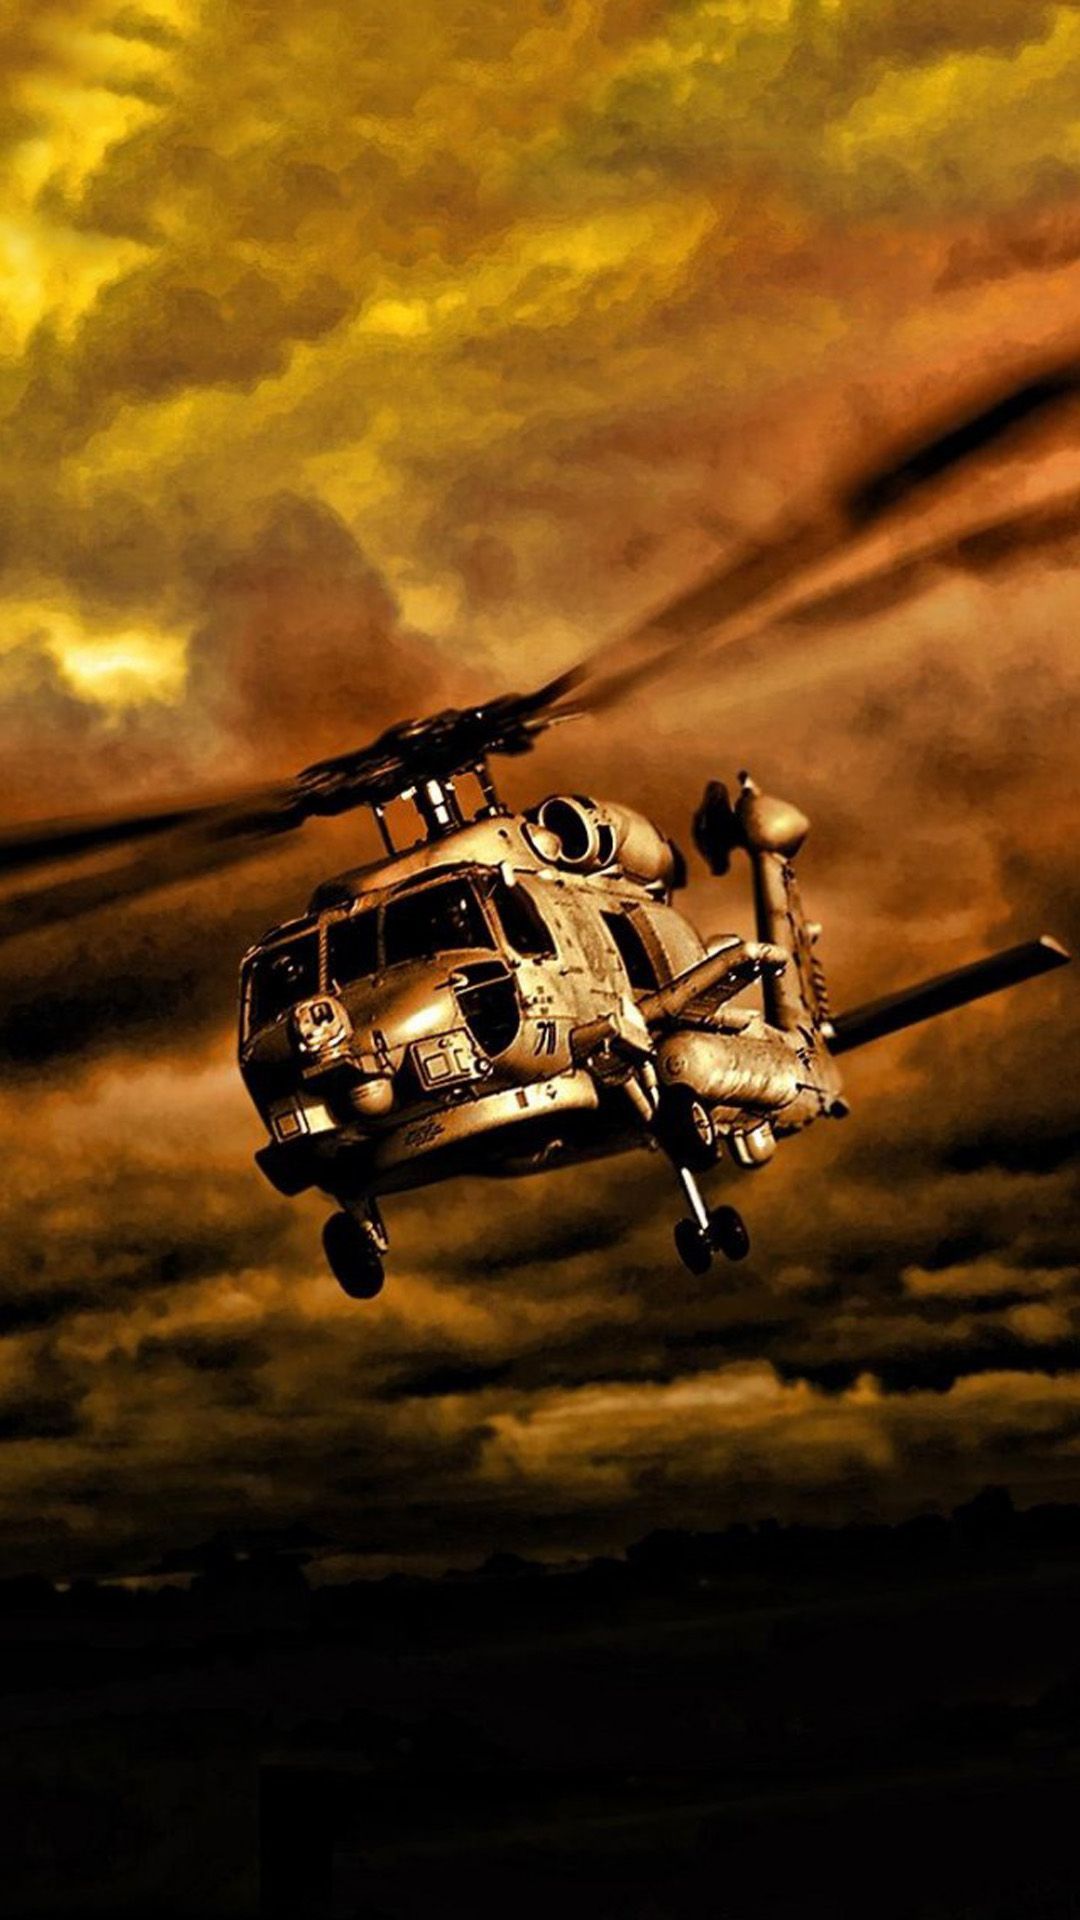 War Helicopters In Cloudy Sky IPhone 6 Wallpaper Download. IPhone Wallpaper, IPad Wallpaper One S. Helicopter, HD Wallpaper Iphone, IPhone Background Wallpaper